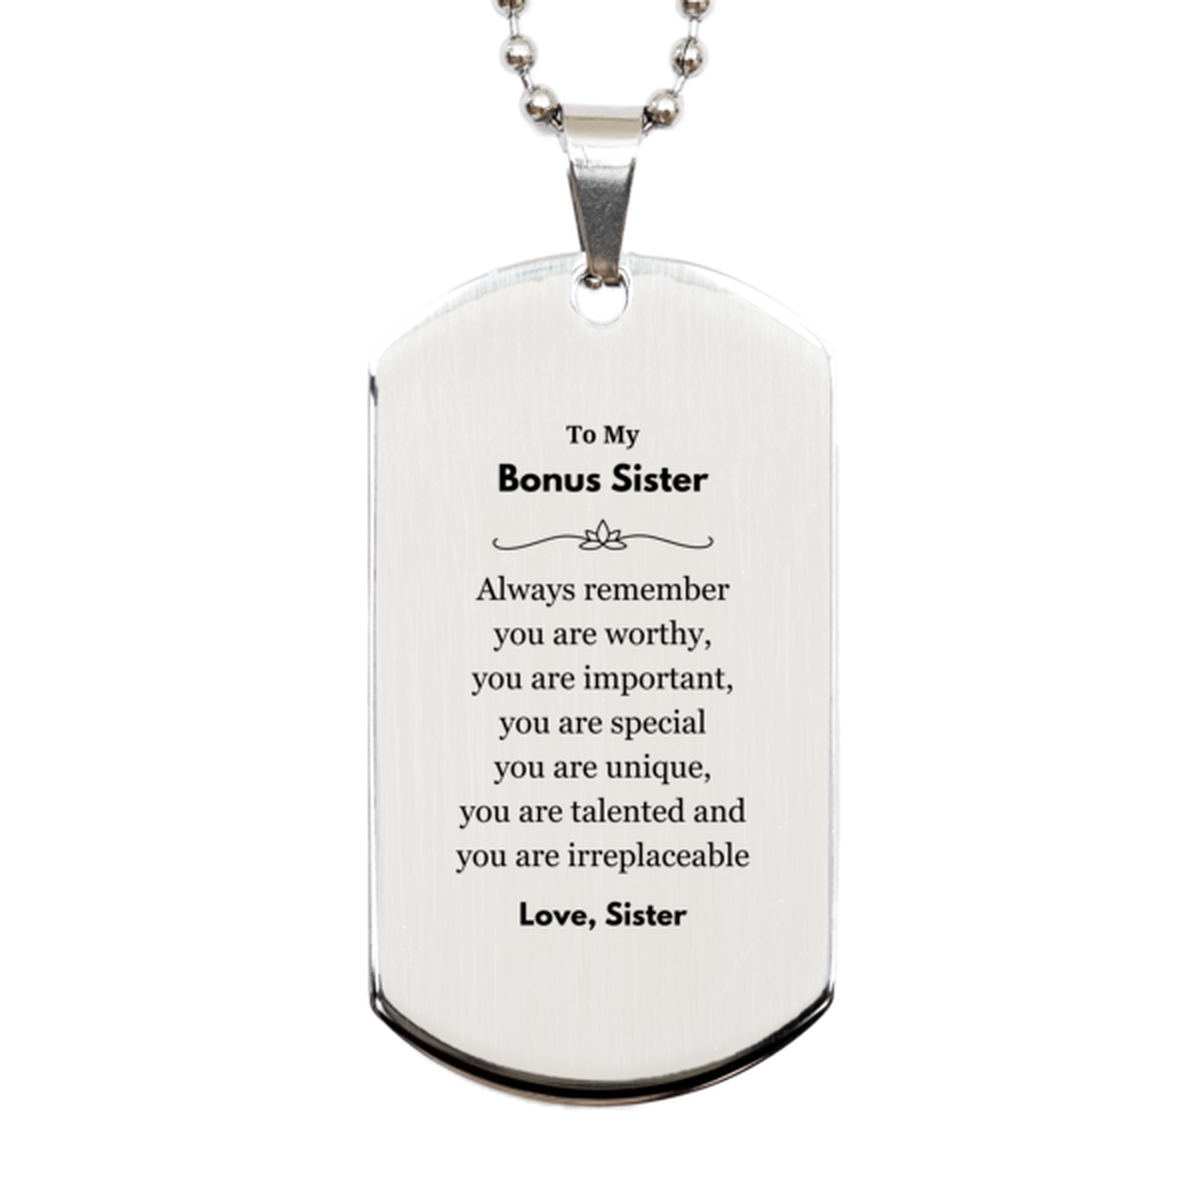 Bonus Sister Birthday Gifts from Sister, Inspirational Silver Dog Tag for Bonus Sister Christmas Graduation Gifts for Bonus Sister Always remember you are worthy, you are important. Love, Sister